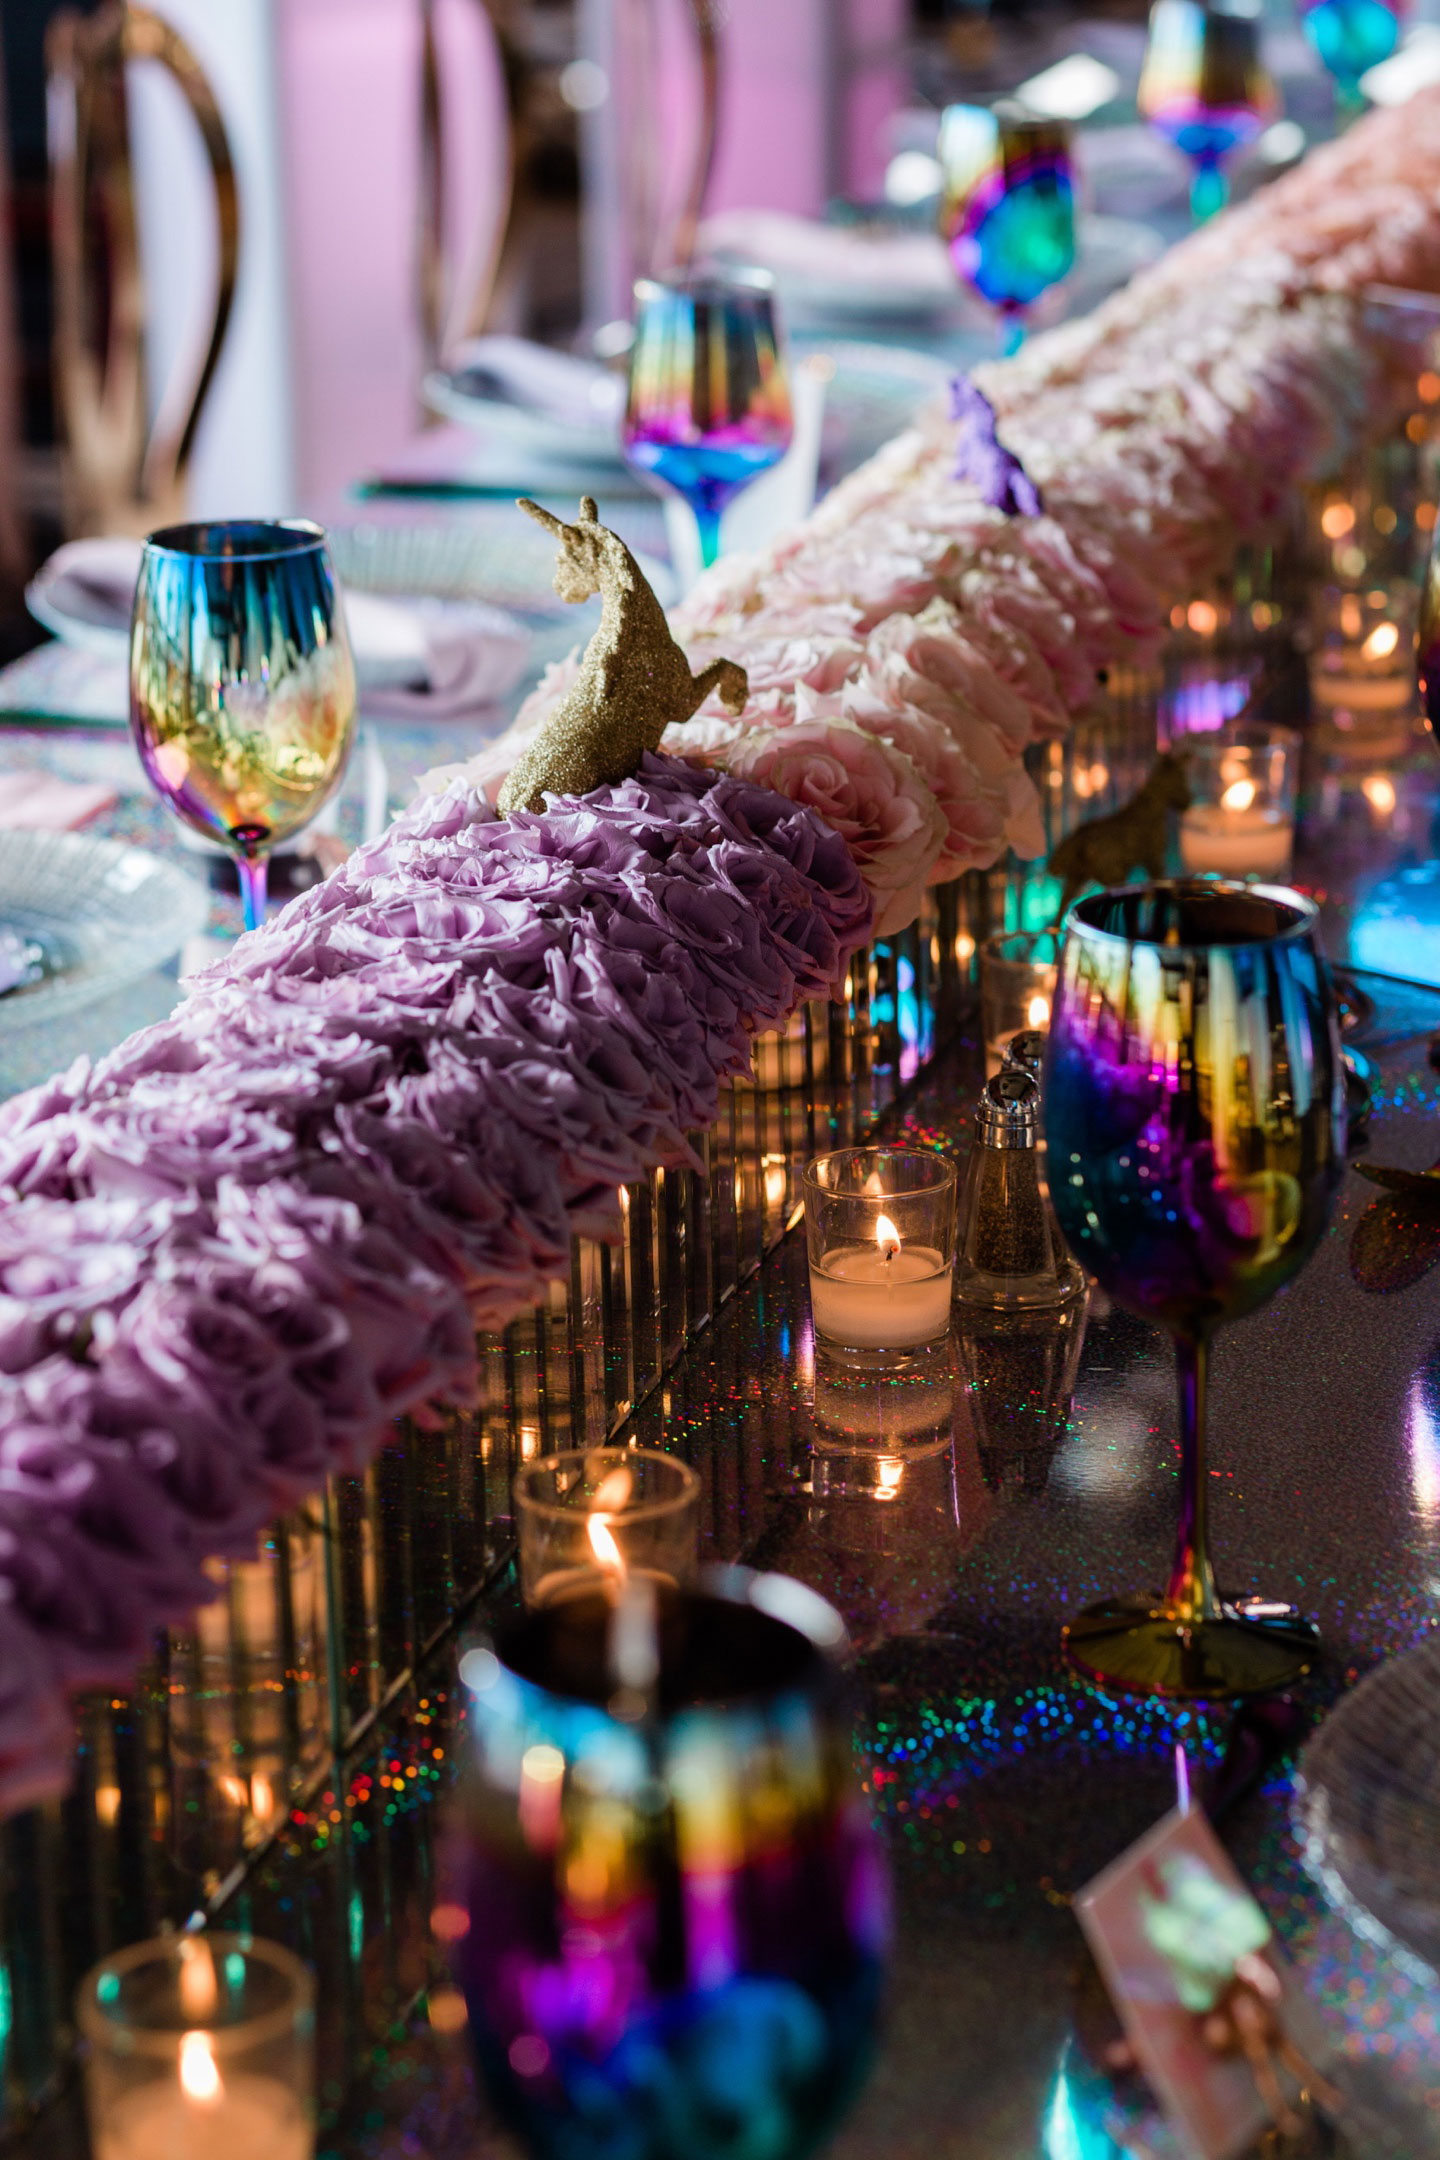 Stunning table setting at unicorn themed event.